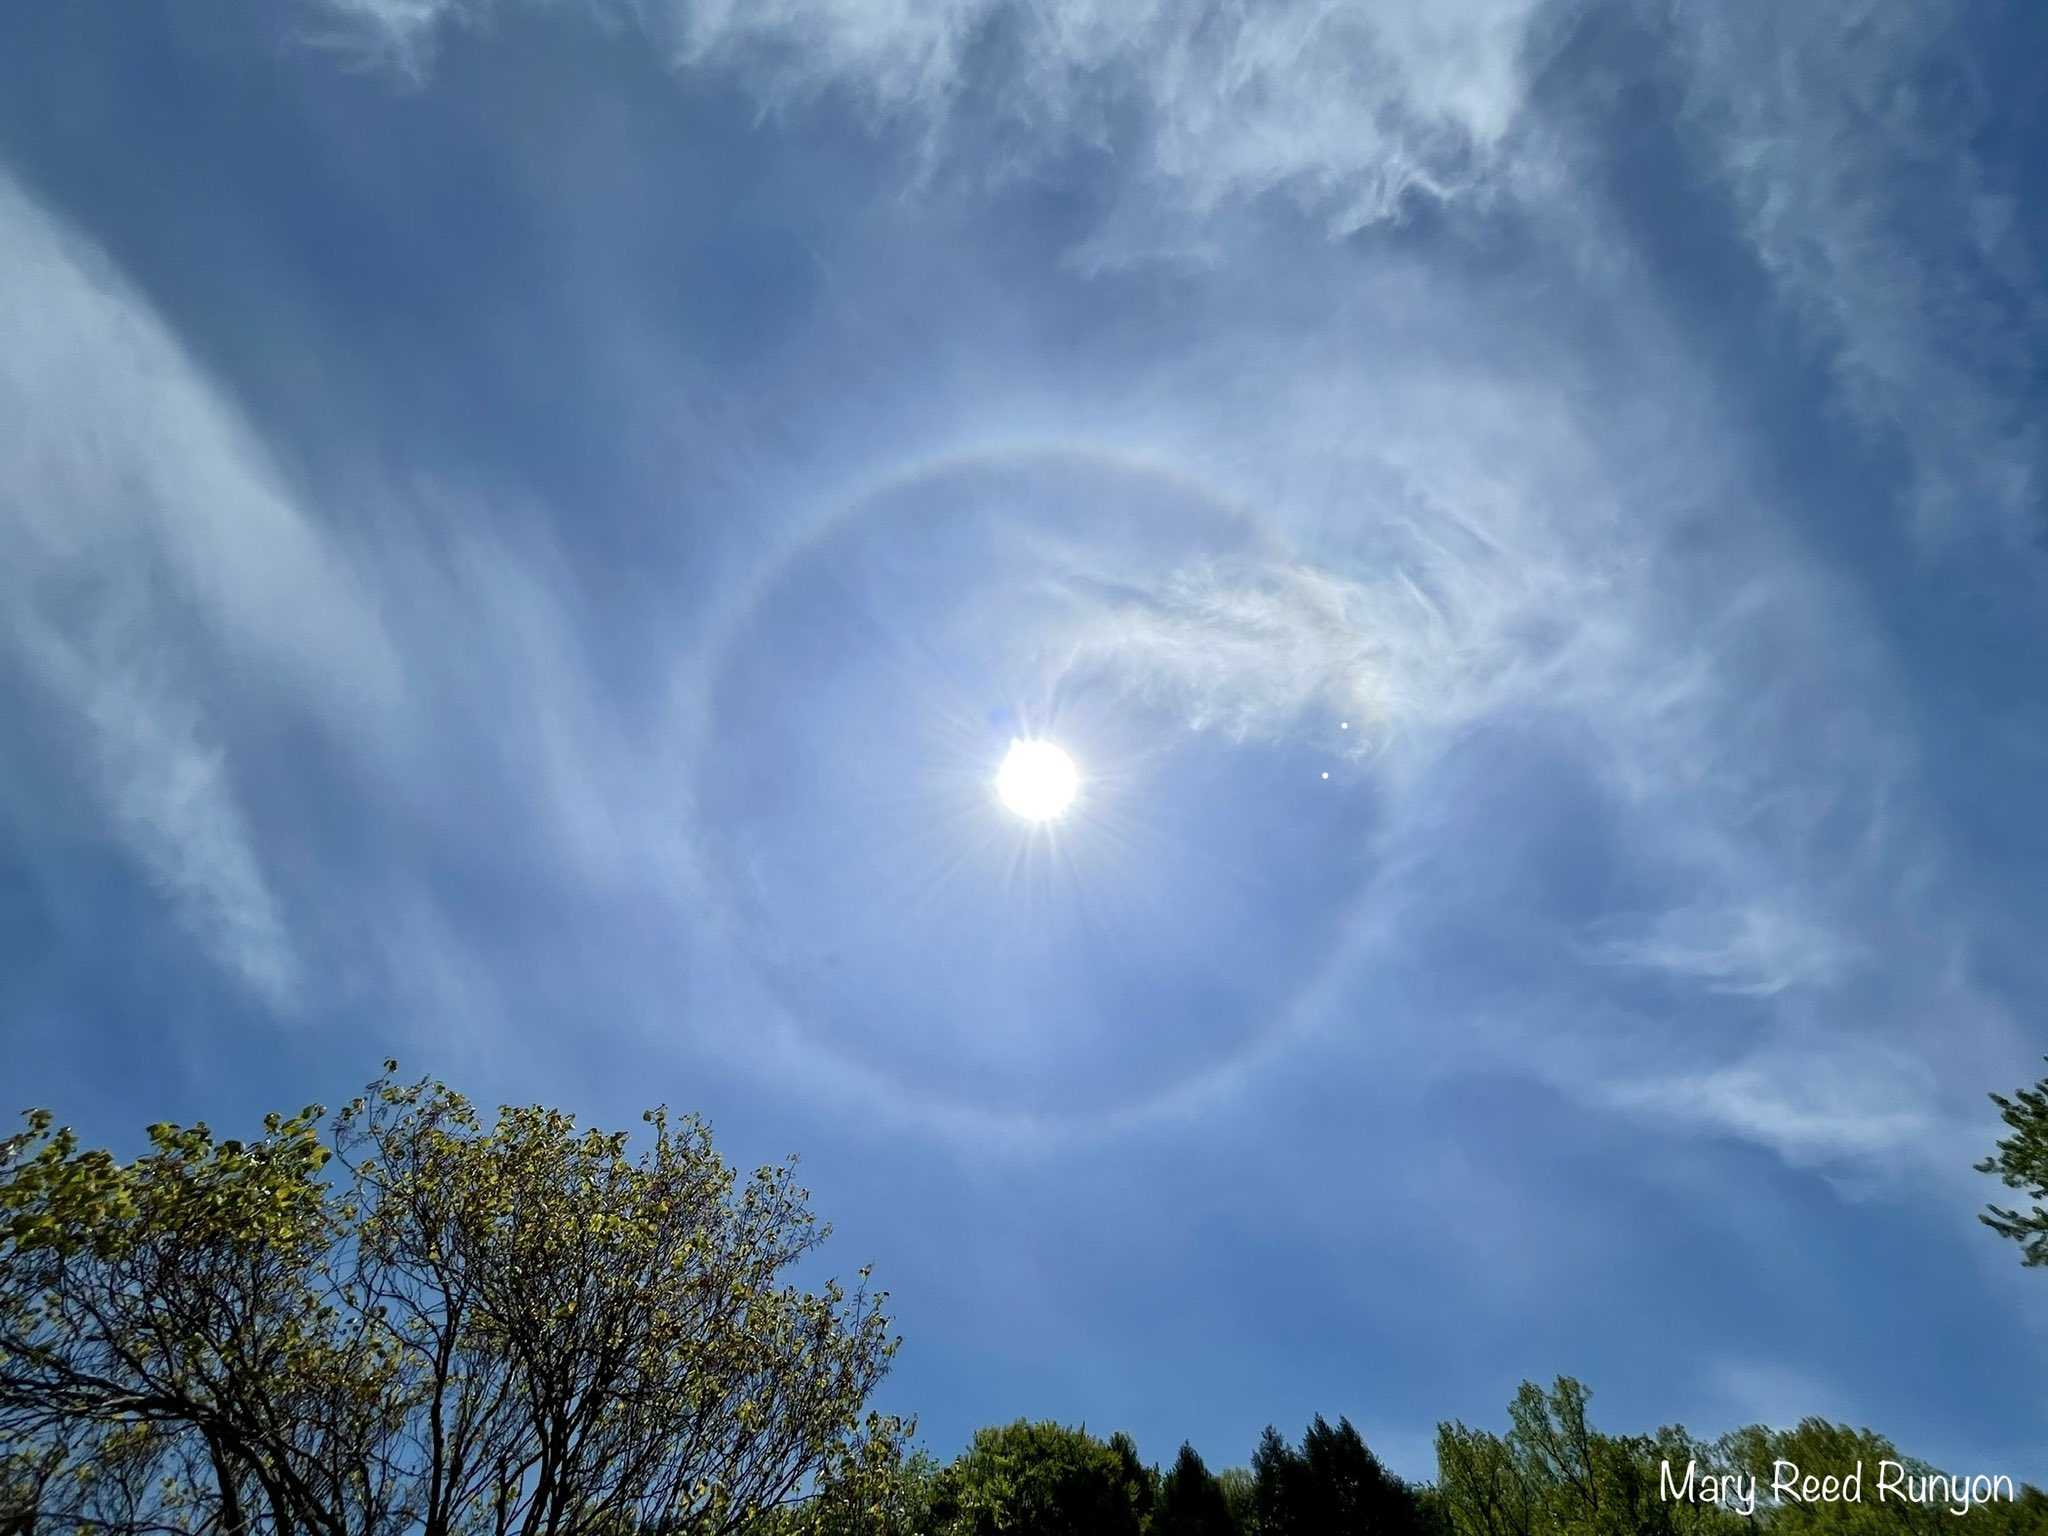 Ring around sun seen from Eureka to Sonoma – The Willits News